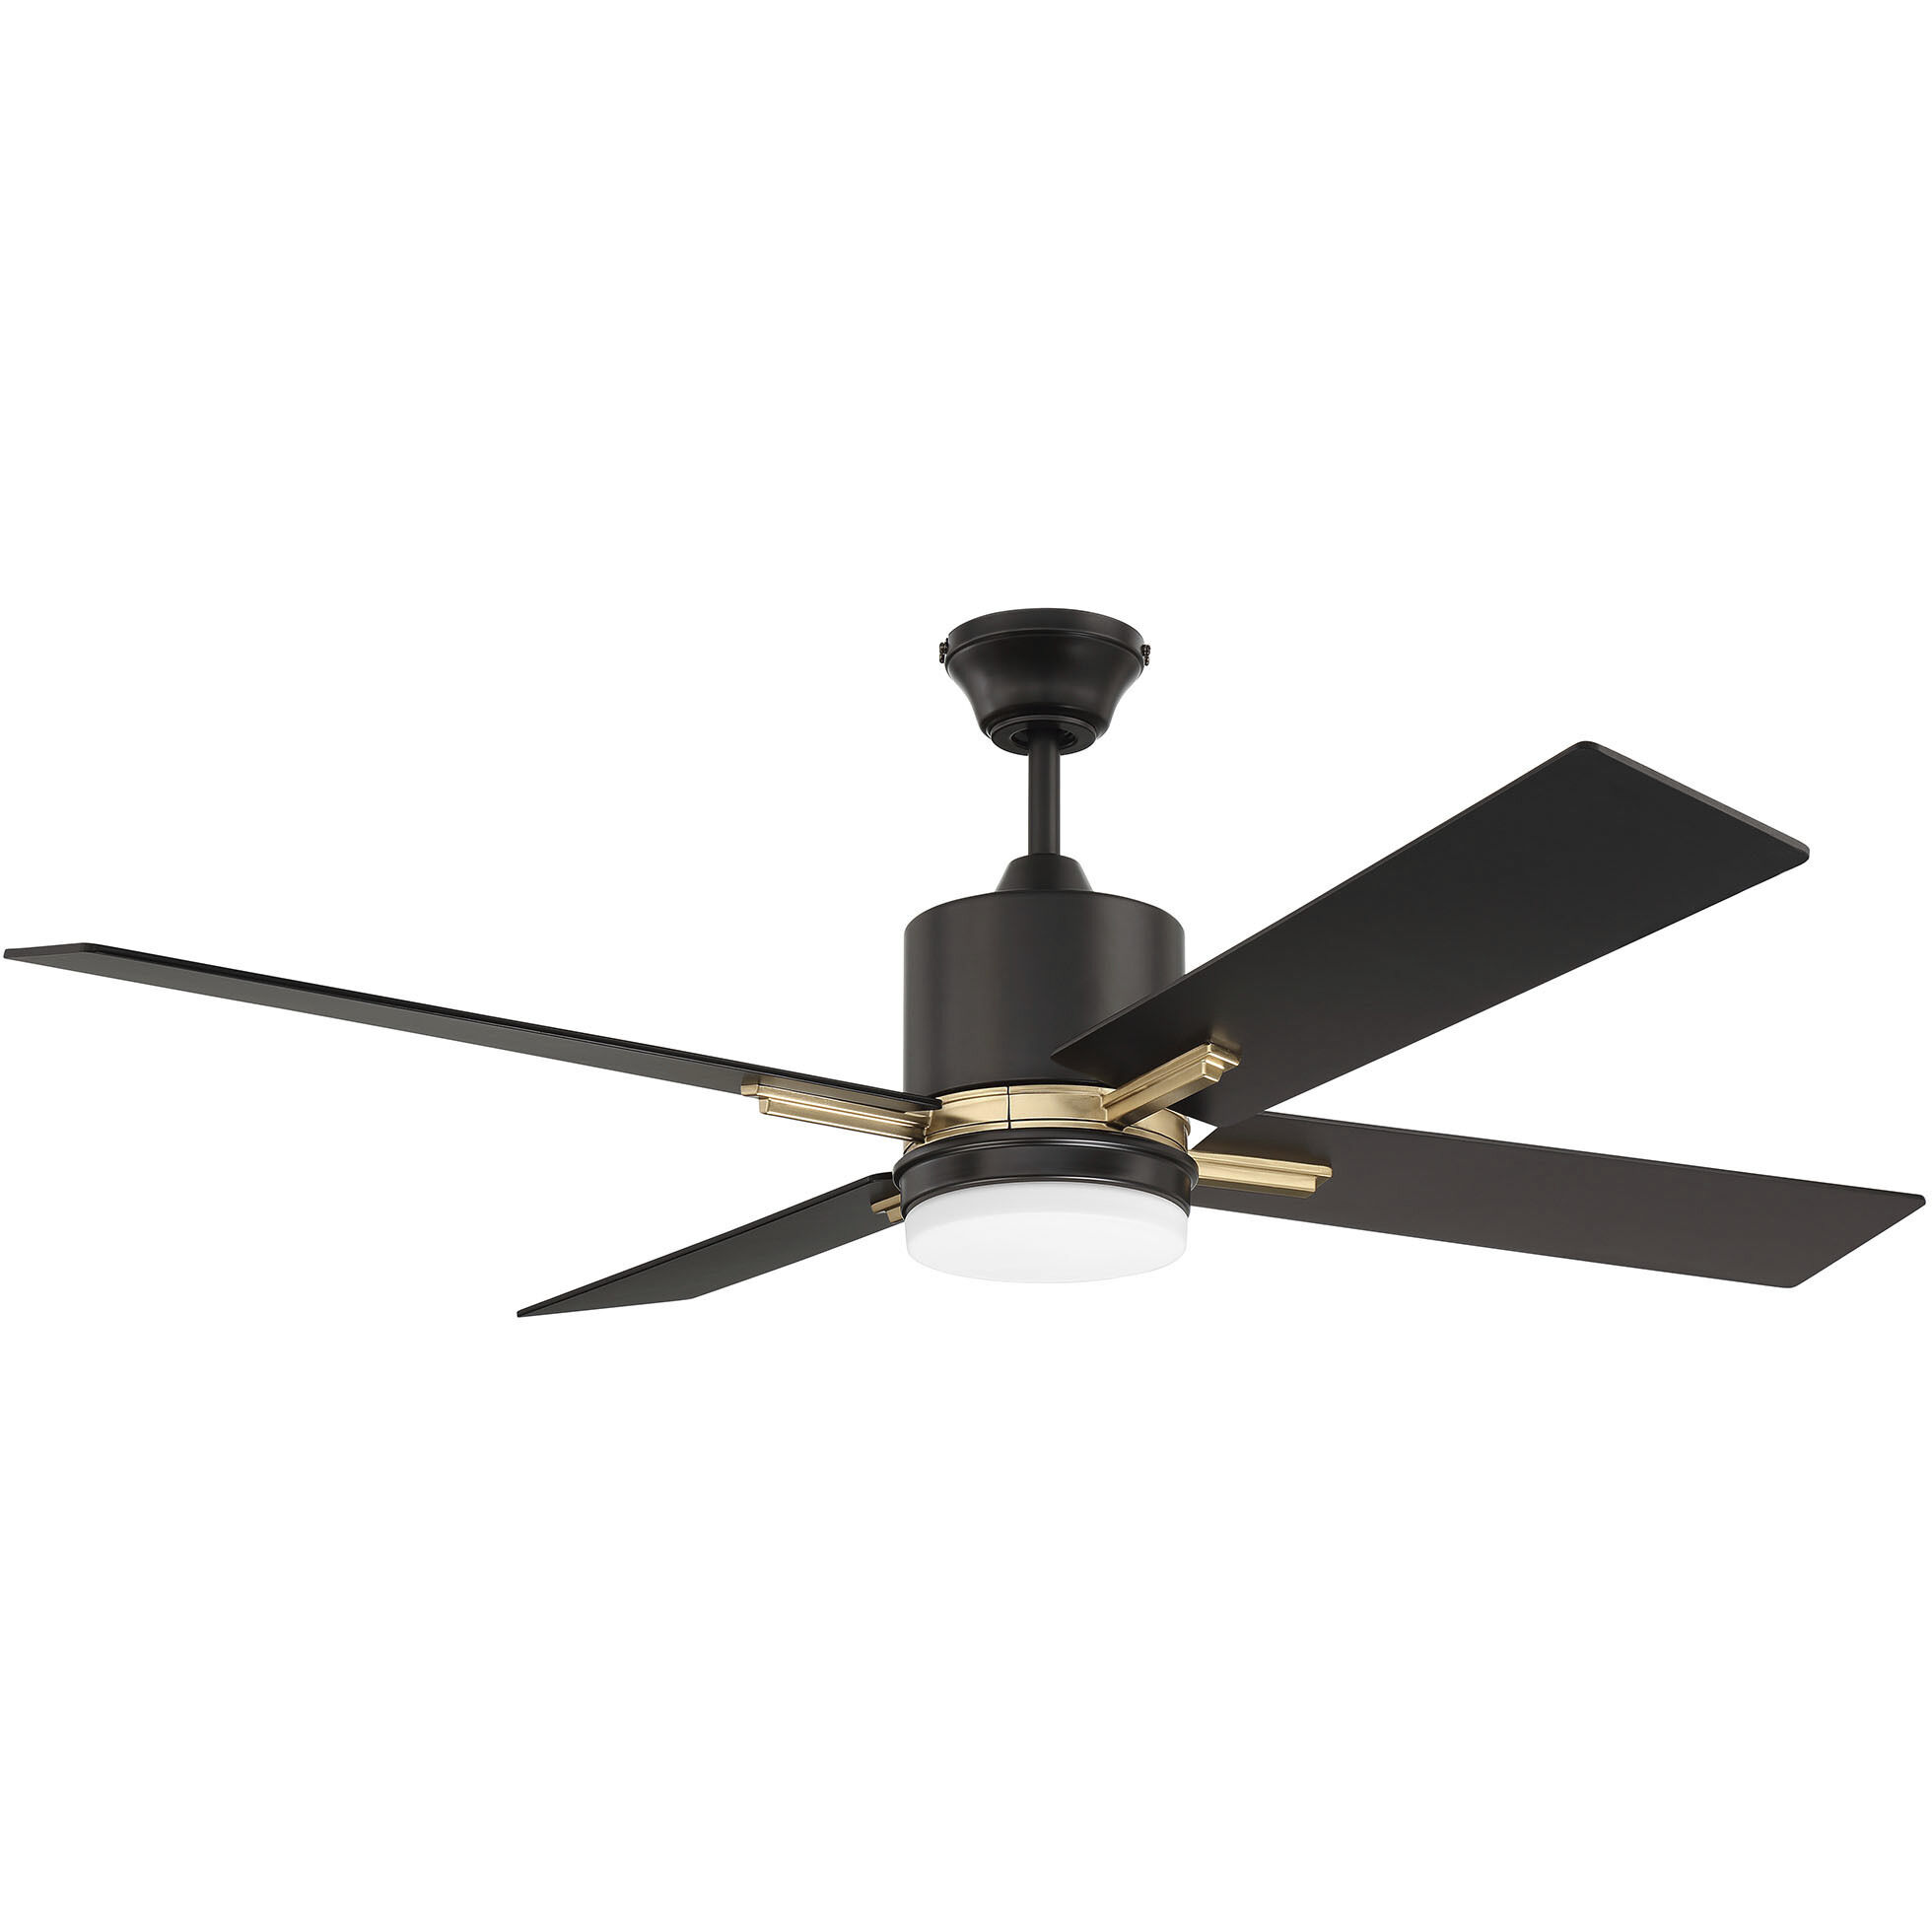 Teana 52 inch White and Satin Brass with White Blades Ceiling Fan